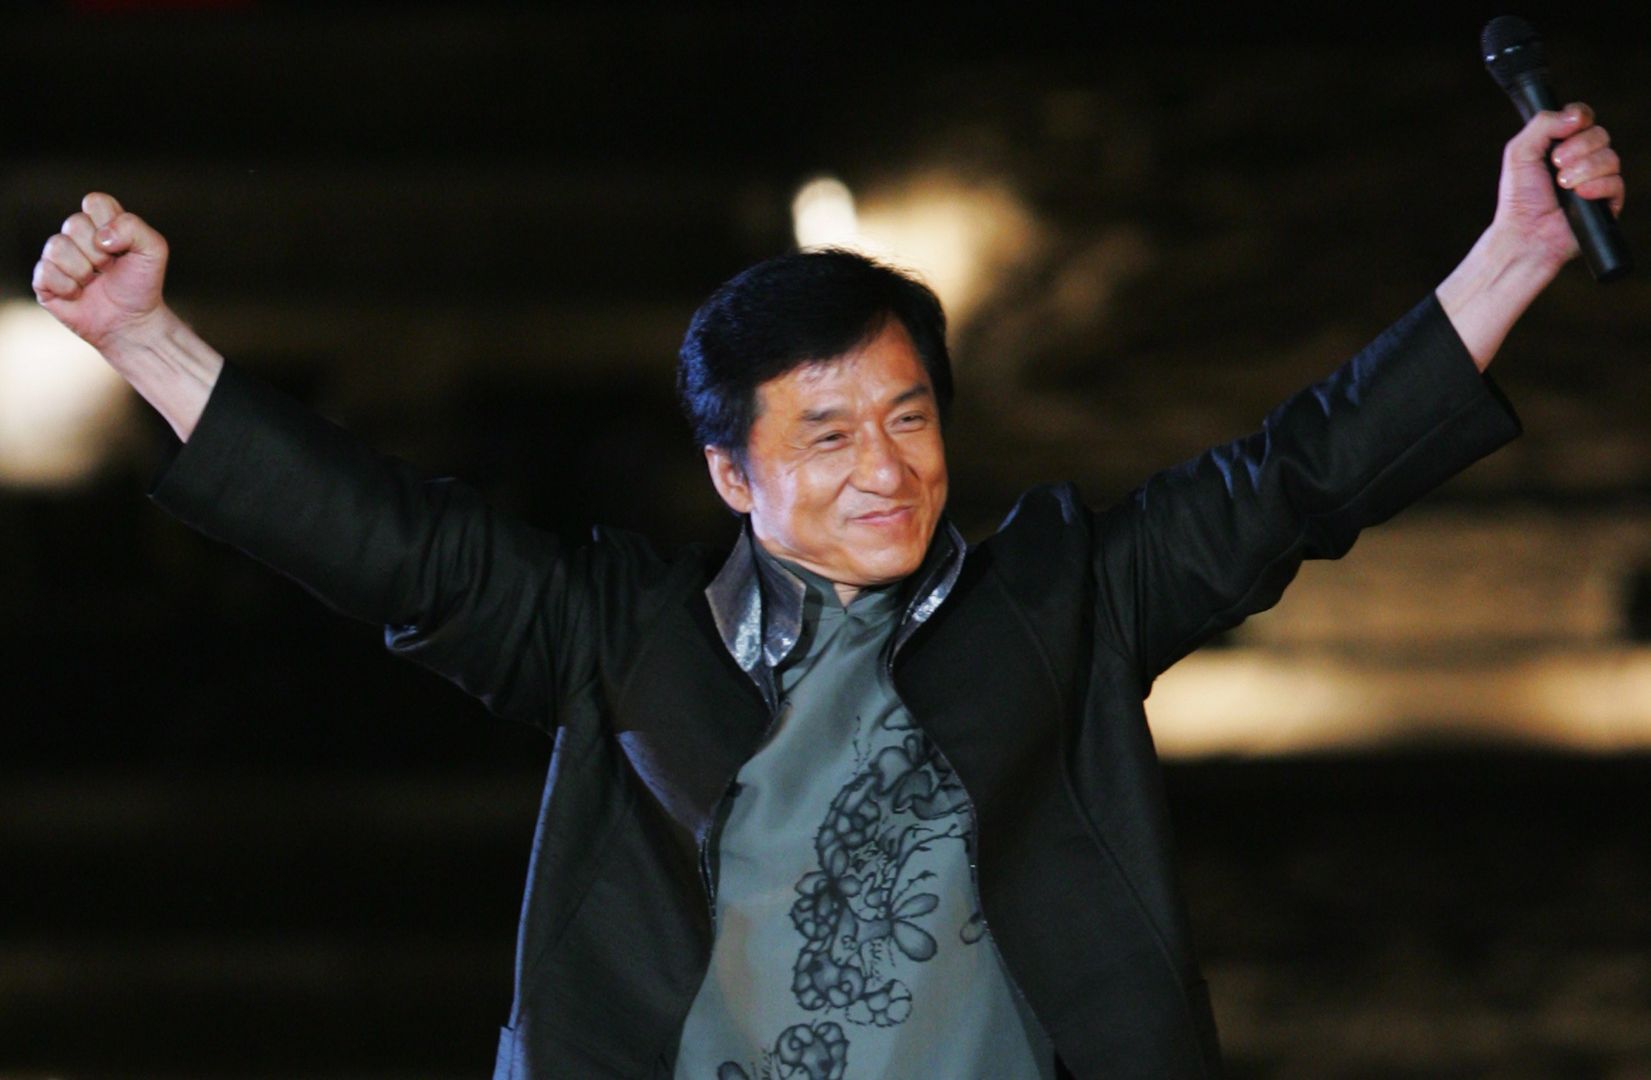 BEIJING - APRIL 30: Hong Kong's star Jackie Chan performs during the Award-giving Ceremony for the fourtth Olympic Songs Competition at the illuminated Worker People's Cultural Palace, the Imperial Ancestral Temple inside the Forbidden City, on April 30, 2008 in Beijing, China. Various activities, including an international long distance race, a song festival, a grand evening and an international speed-walking race, will be held in Beijing to celebrate the 100-day mark which falls on April 30. (Photo by Feng Li/Getty Images)